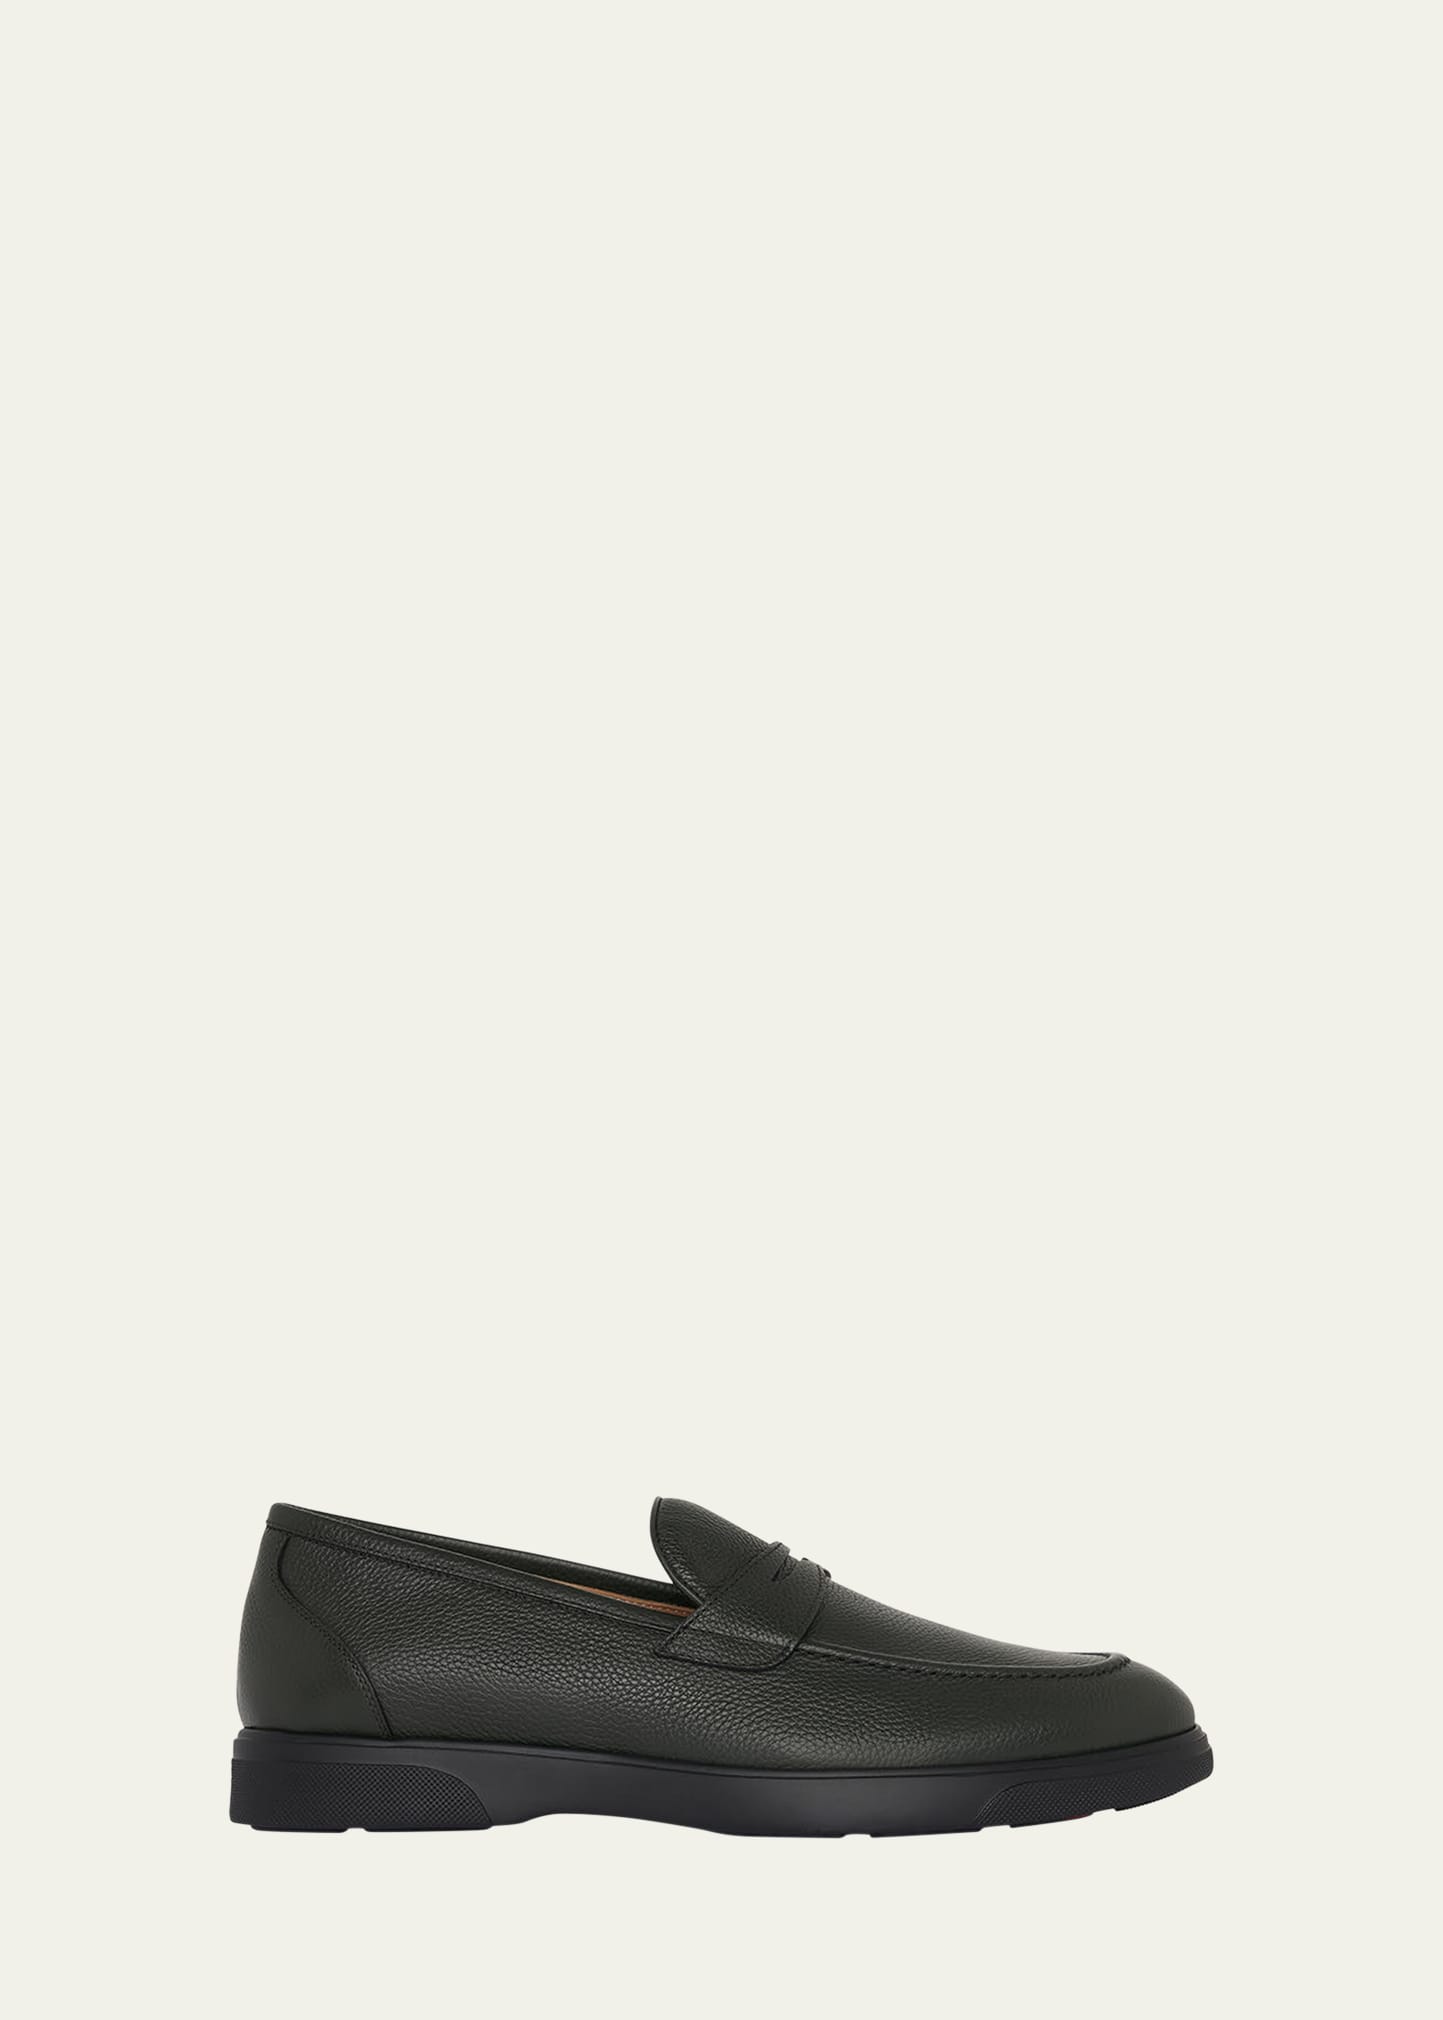 Men's Calf Leather Vibram-Sole Penny Loafers